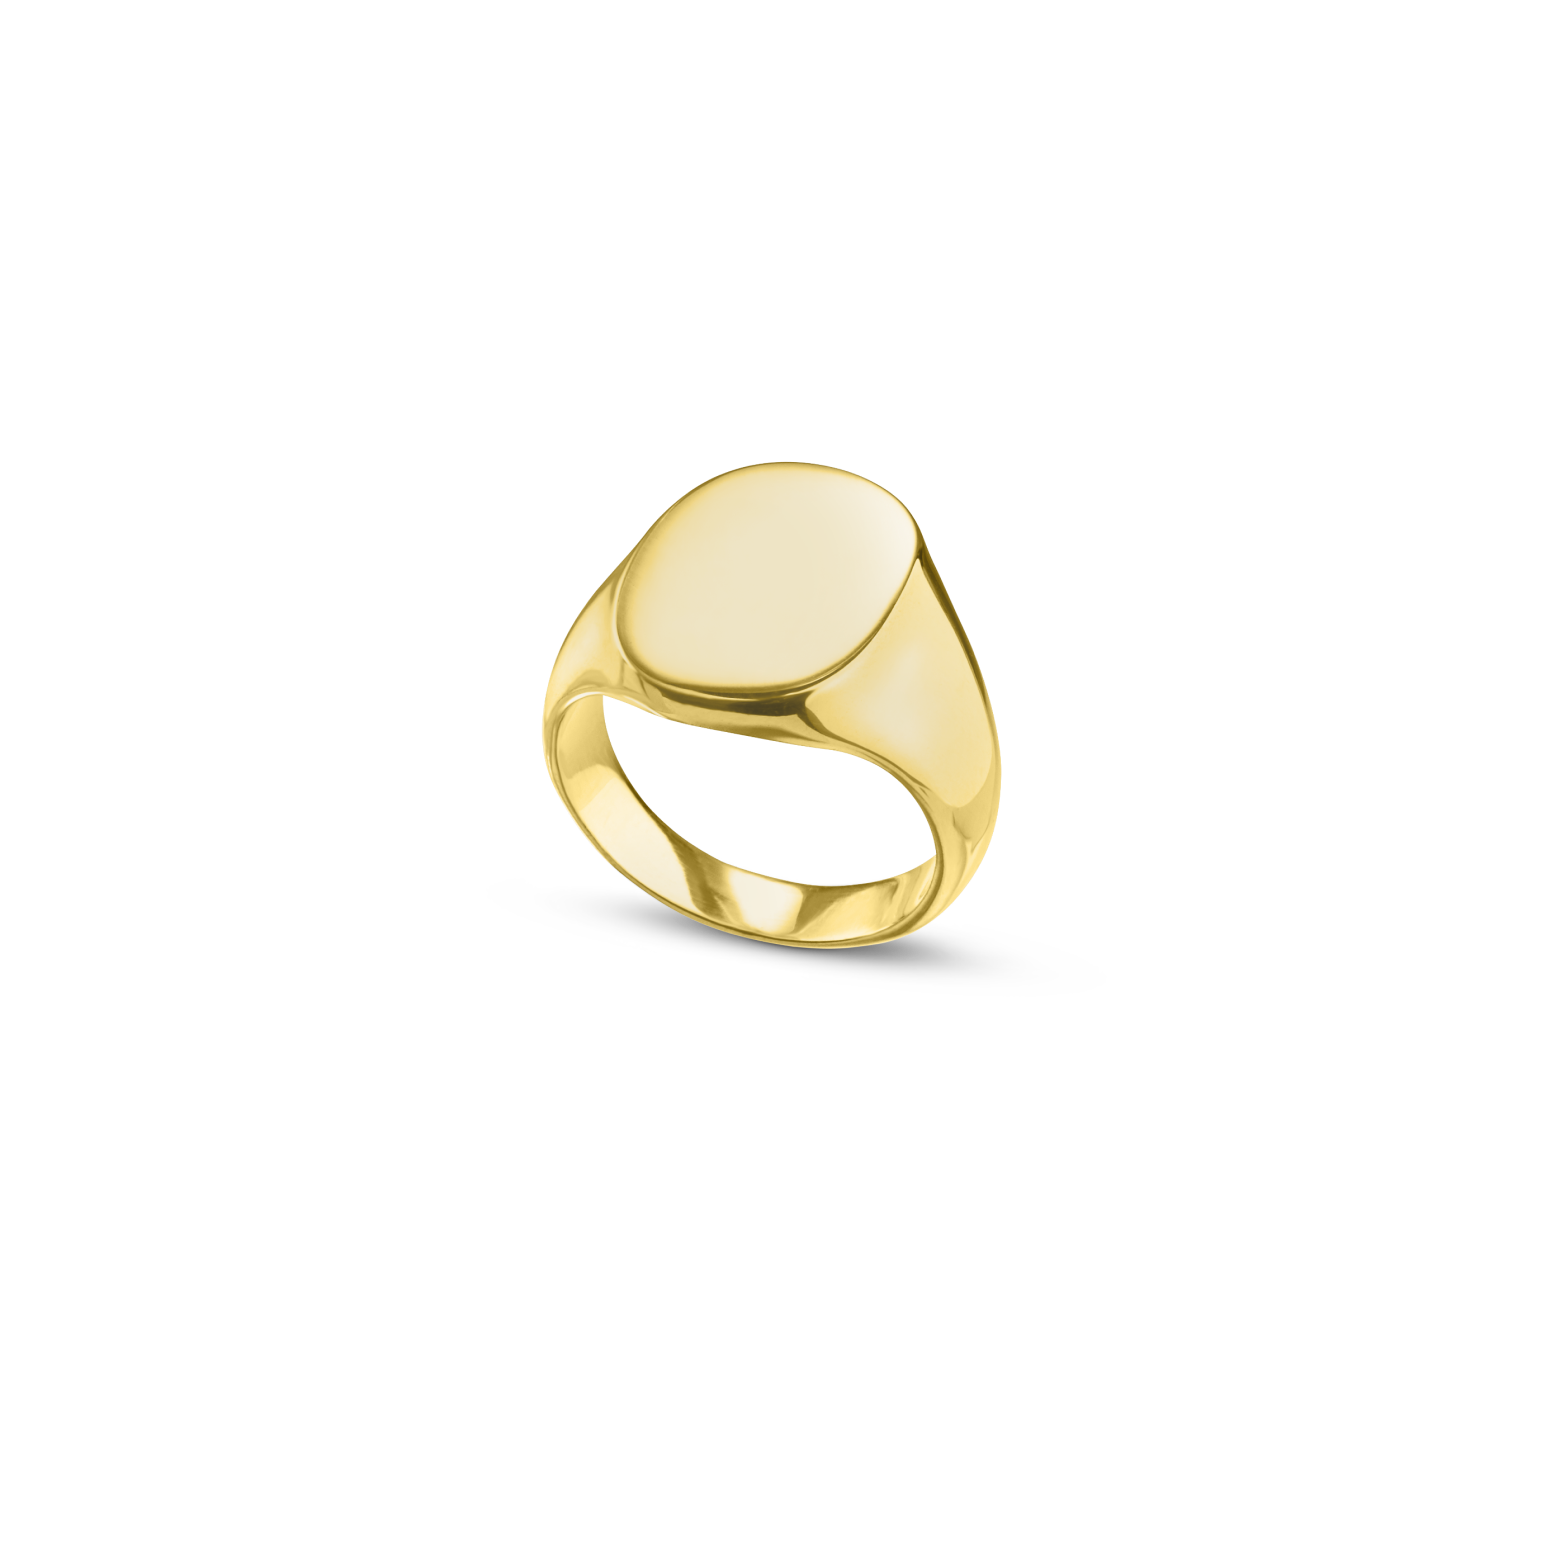 The Oval Signet Ring